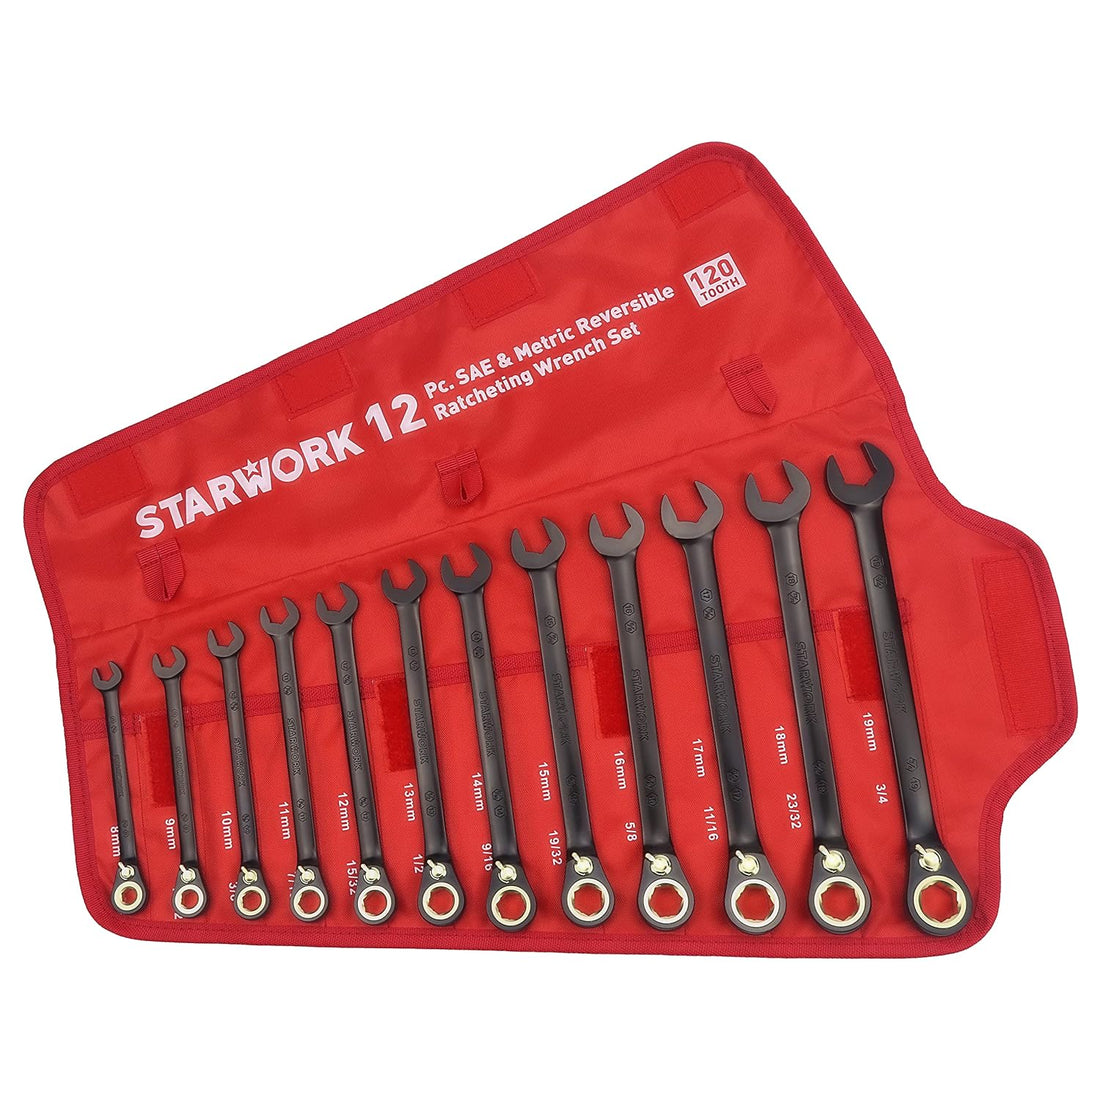 STARWORK TRUE MECHANIC™ 12Pc. 120T Reversible SAE&Metric Ratcheting Wrench Set, Long Pattern, Professional, With Portable Roll-Up Pouch Bag